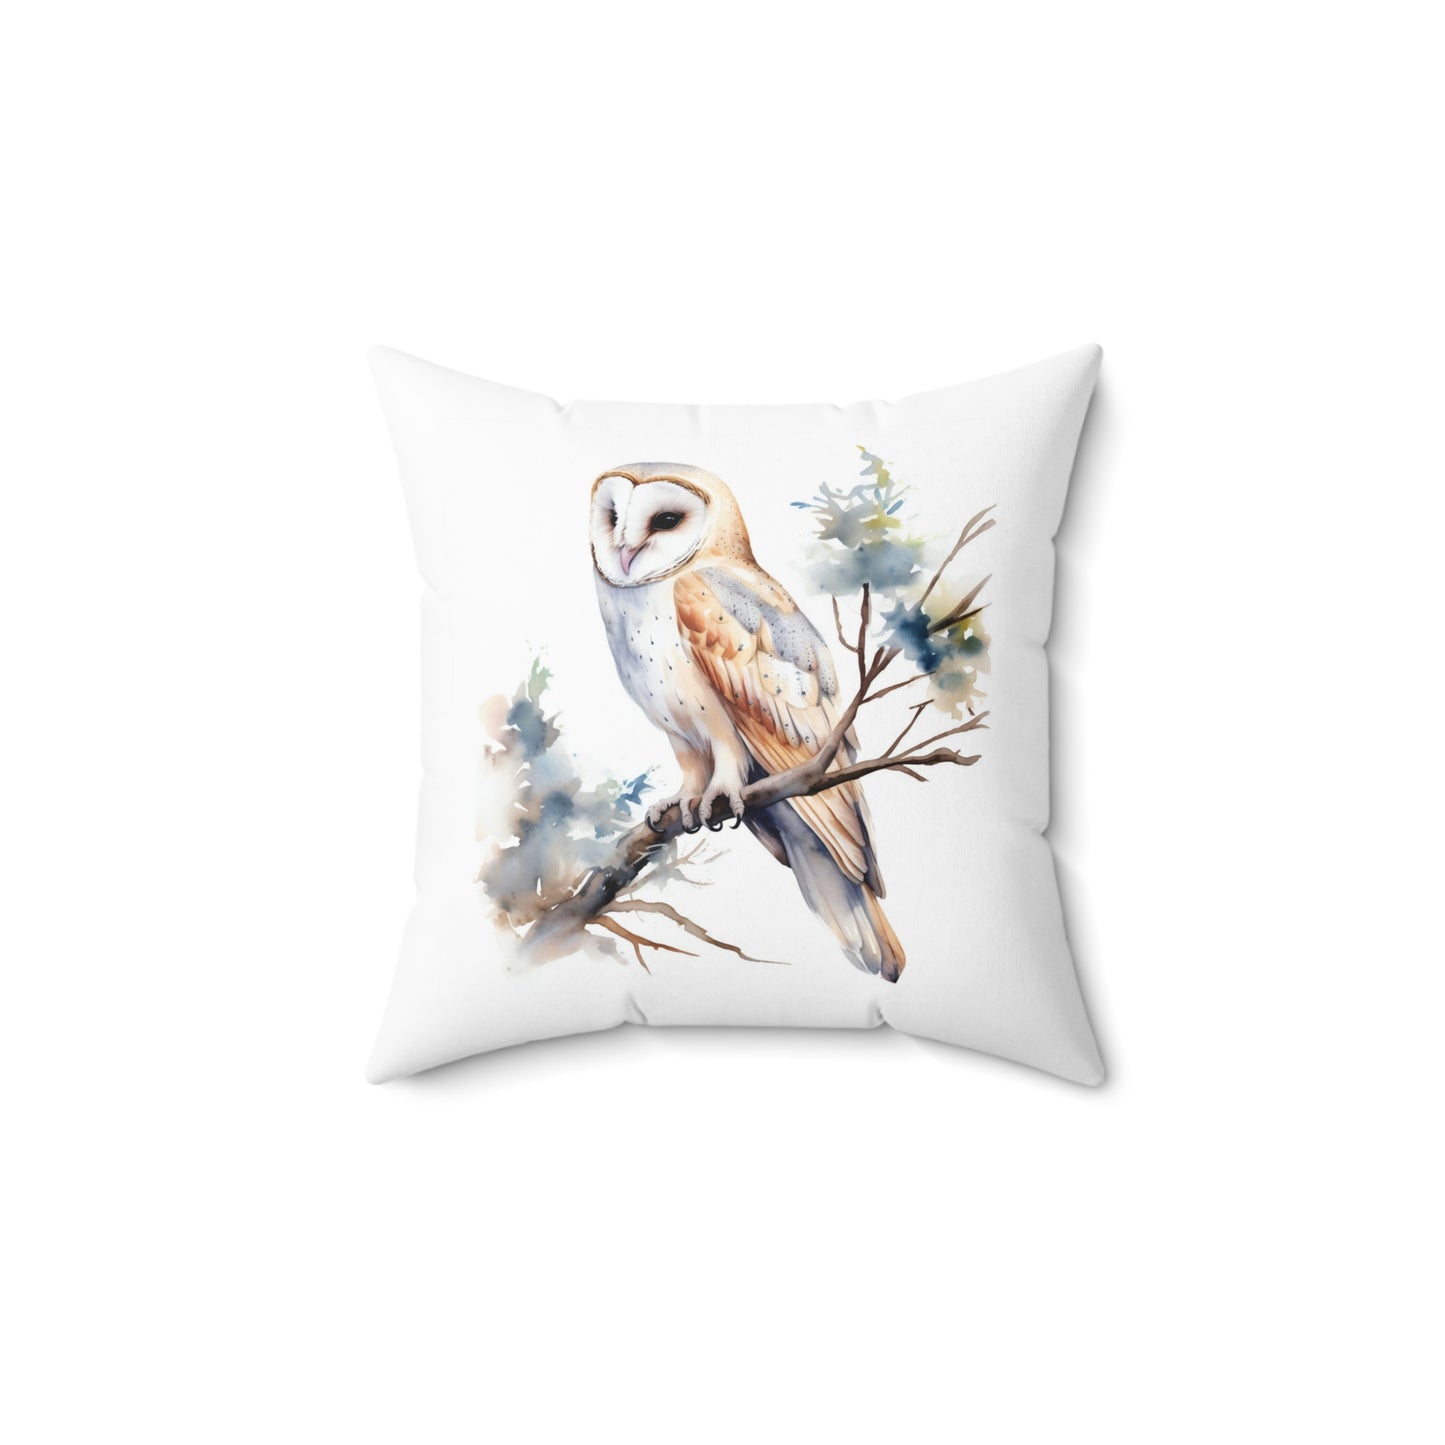 Barn Owl Pillow, Watercolor Barn Owl Throw Pillow, Decorative Pillow, Square Bird Cushion, Double Sided Accent Pillow, Concealed Zipper